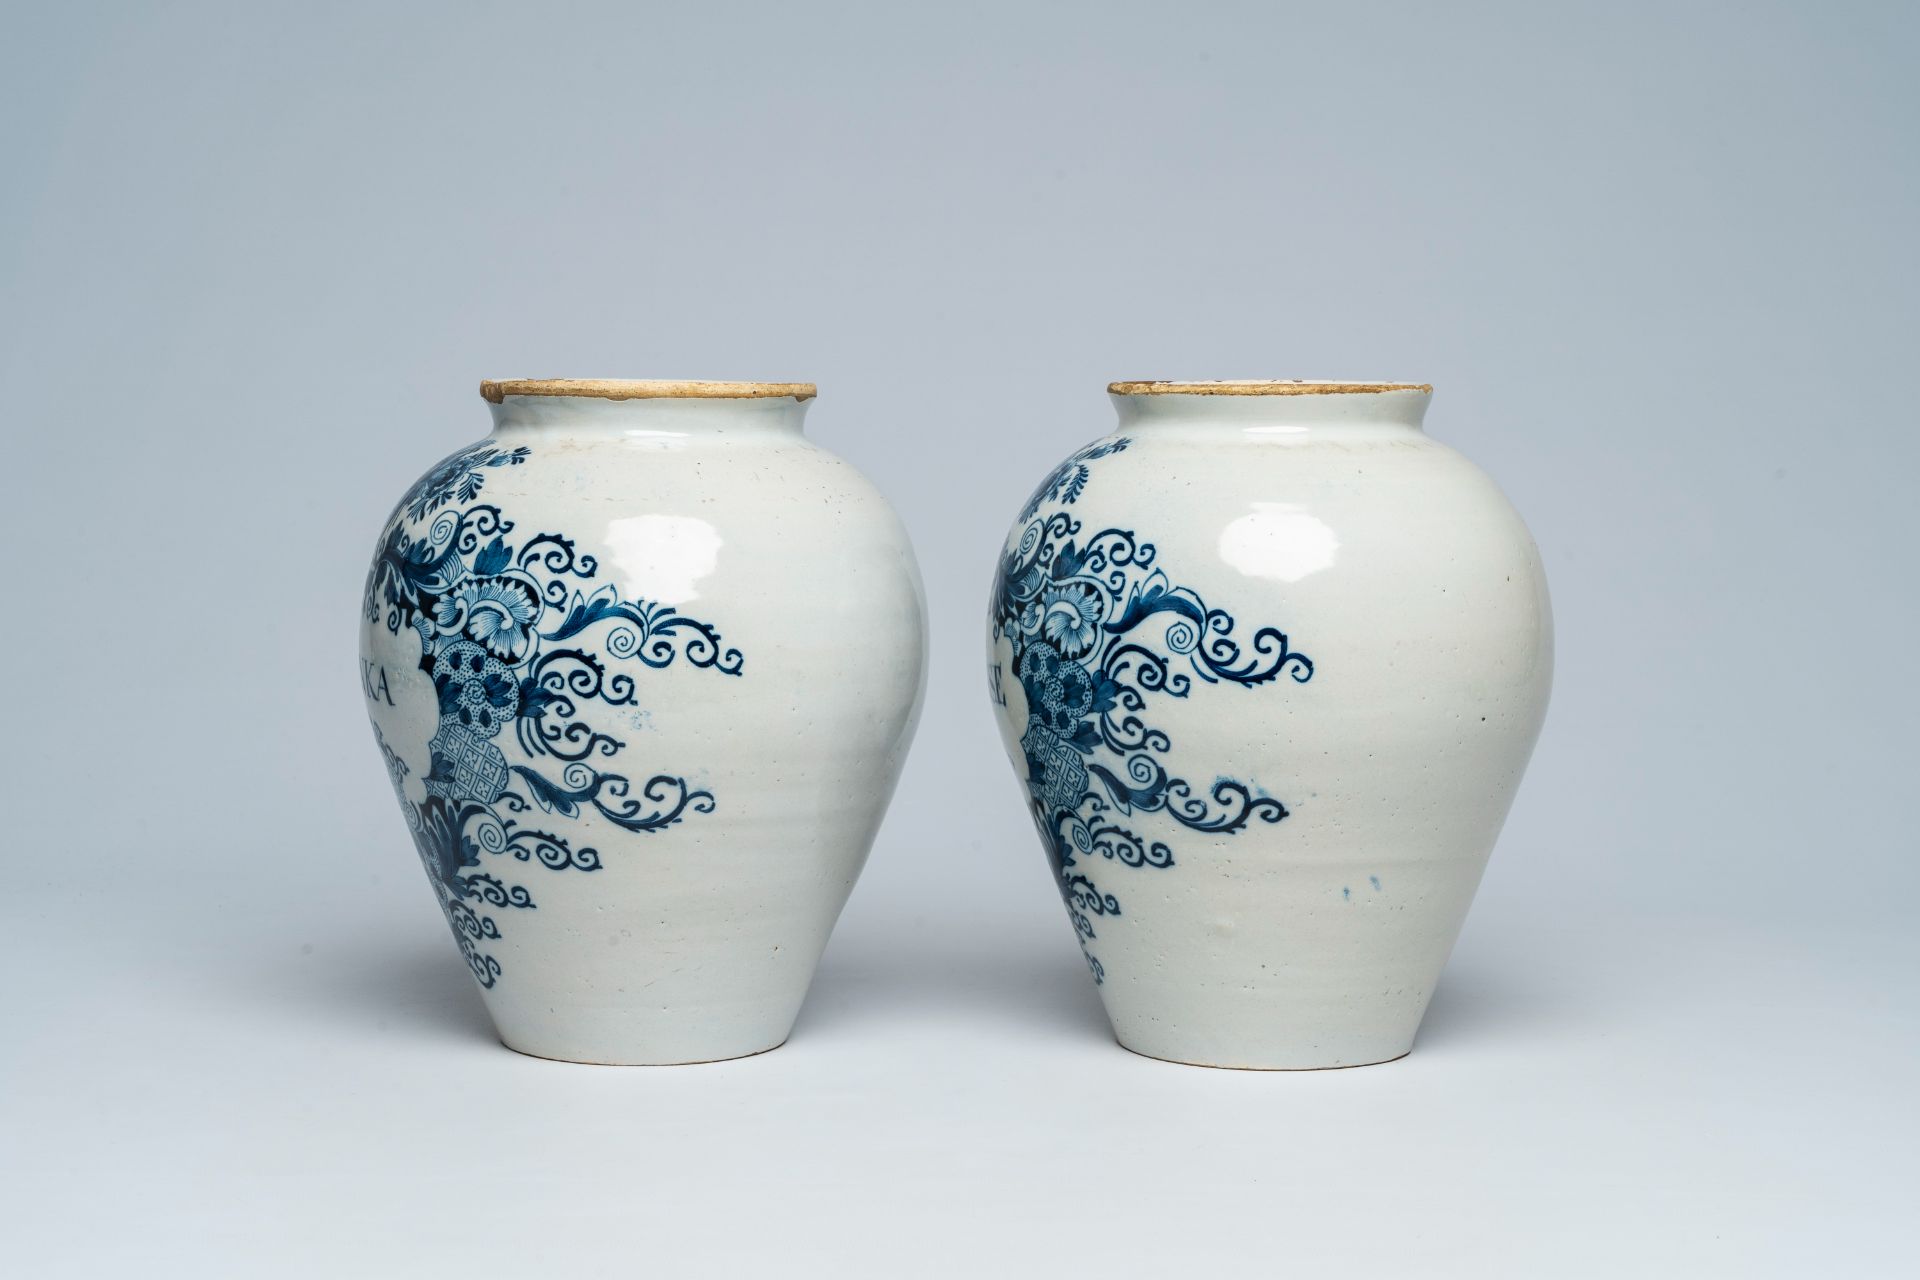 A pair of Dutch Delft blue and white tobacco jars with brass lids, 18th C. - Image 3 of 7